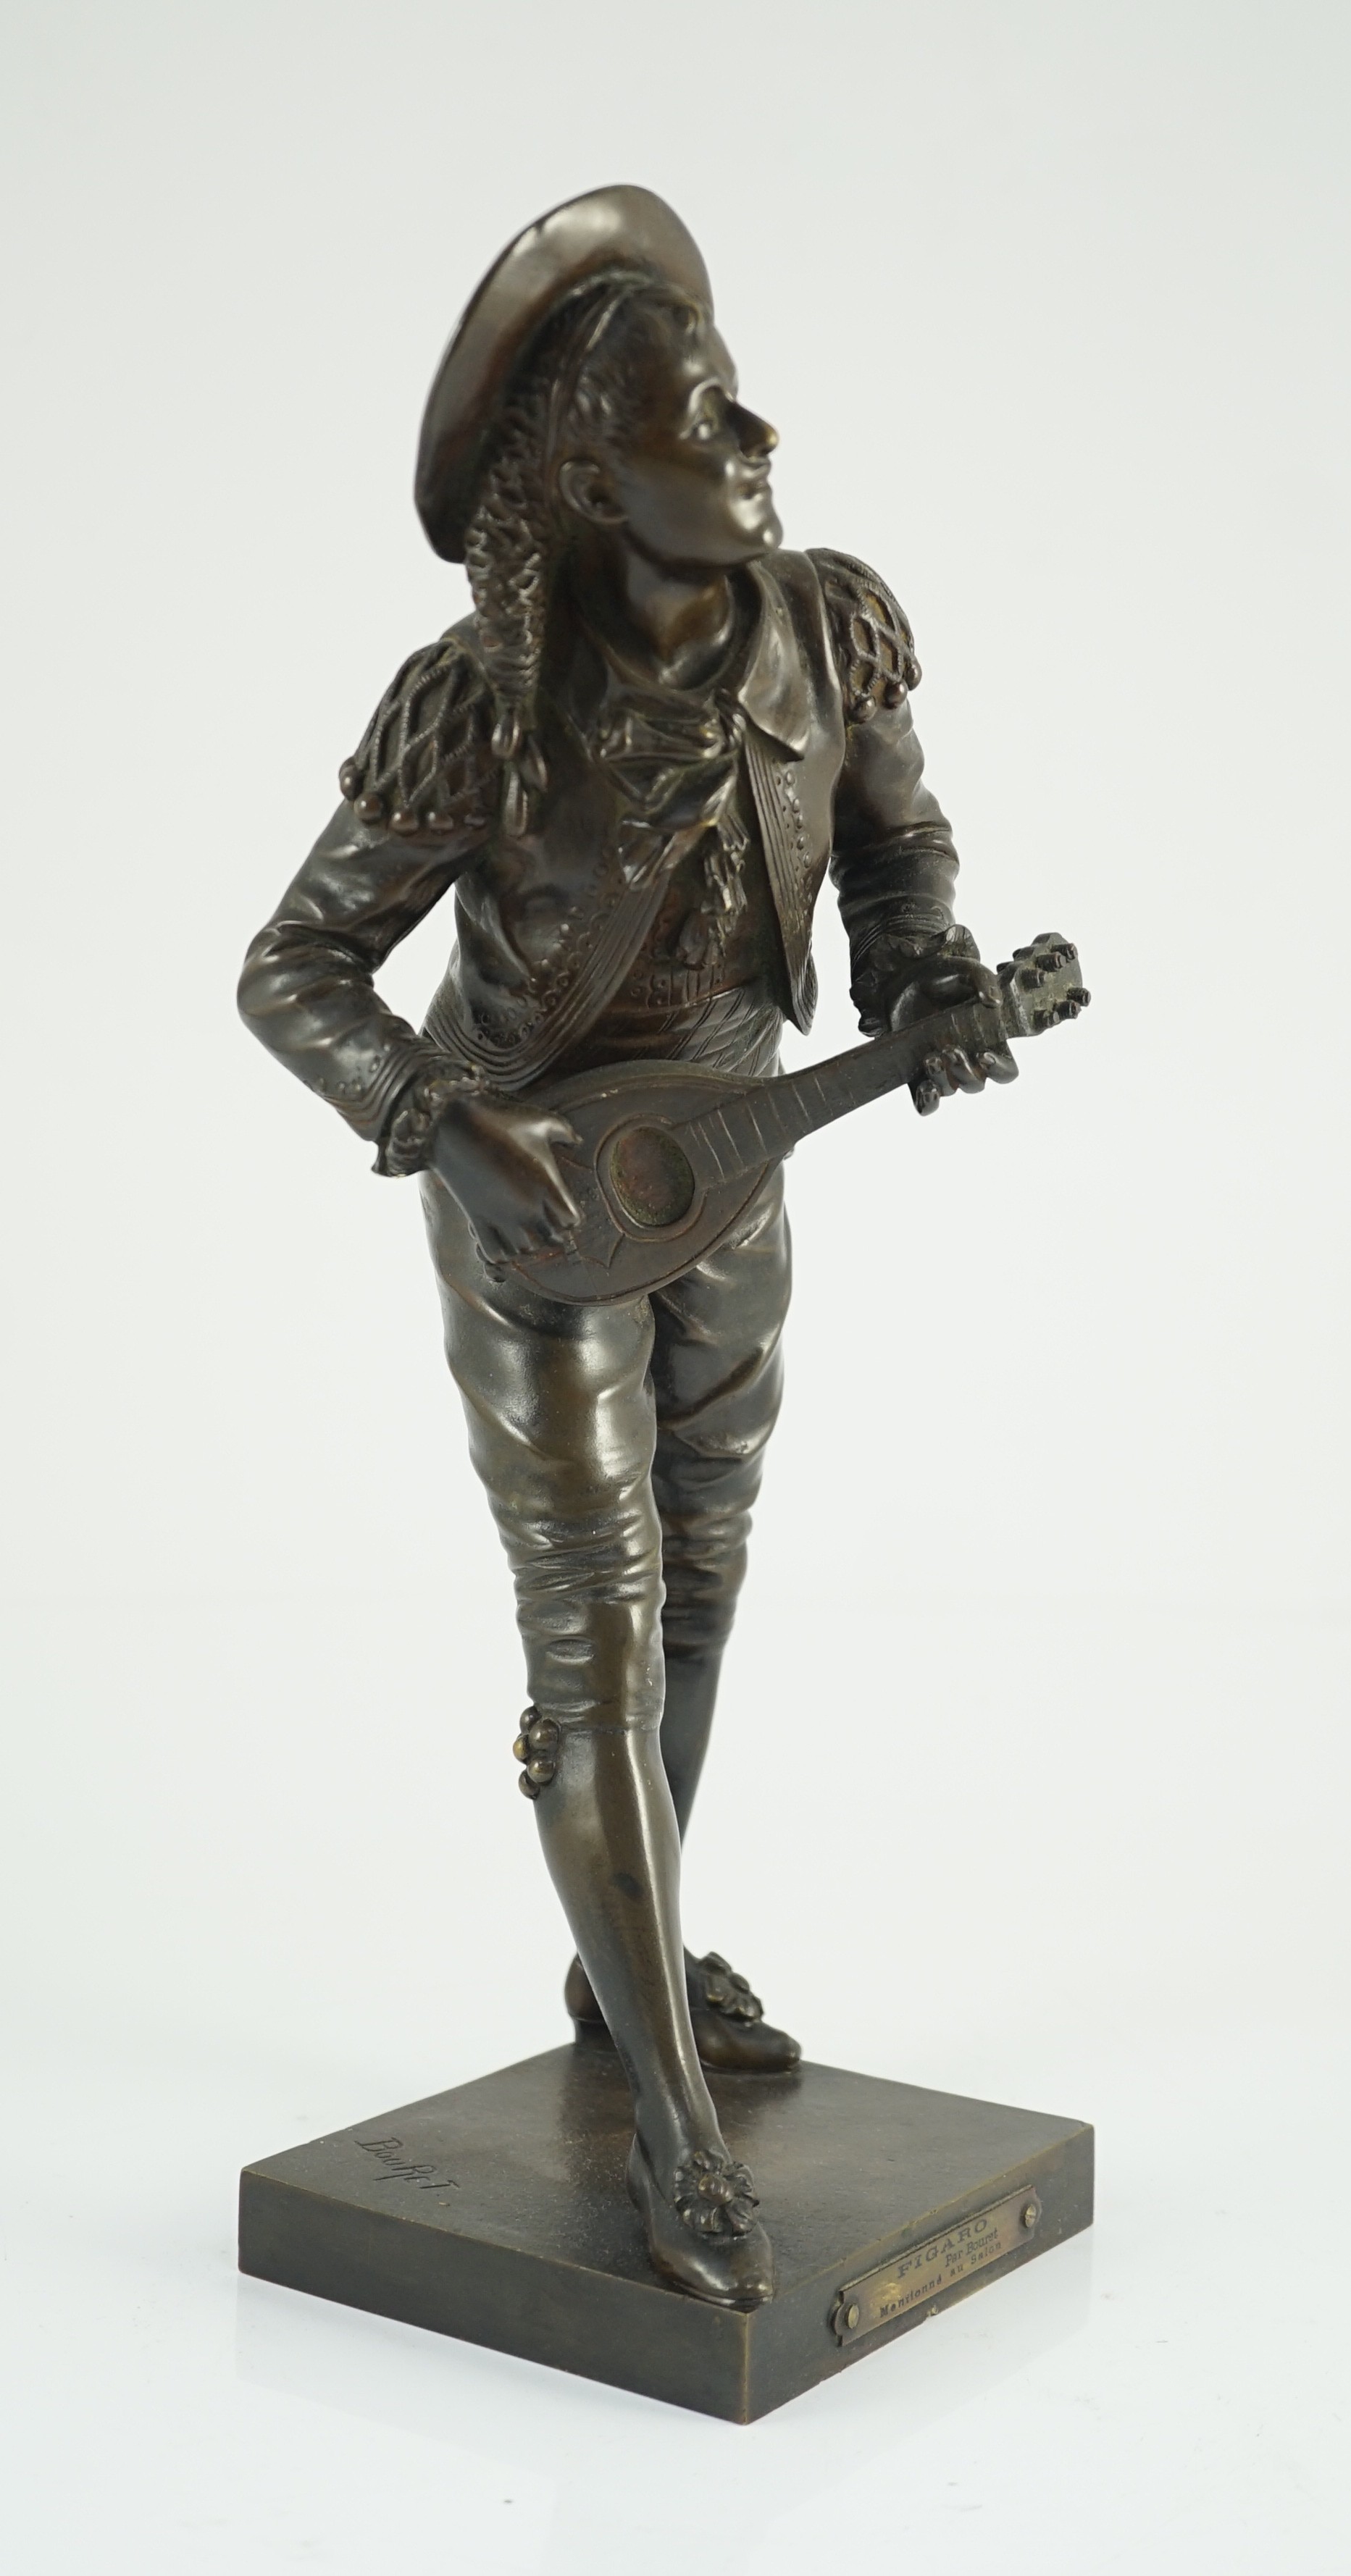 Eutrope Bouret (French, 1833-1906). A bronze figure of 'Figaro', standing playing a mandolin, signed - Image 5 of 9